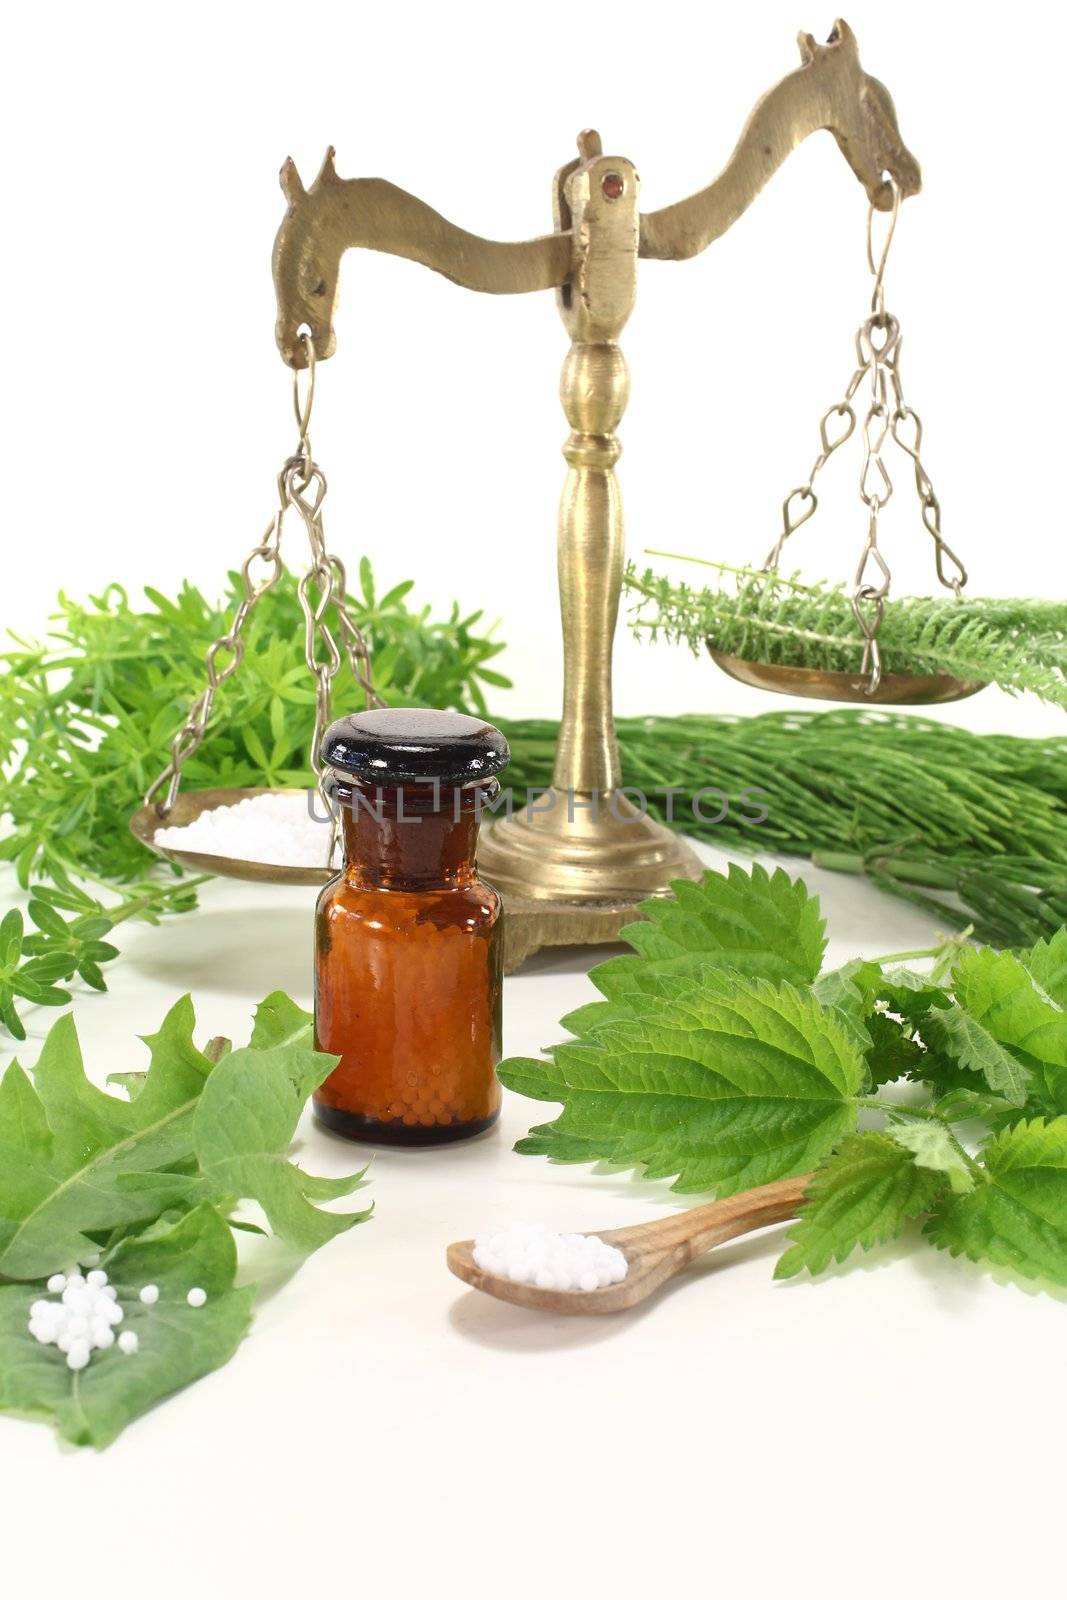 Homeopathy with globules, an apothecary jar and scale, and natural herbs